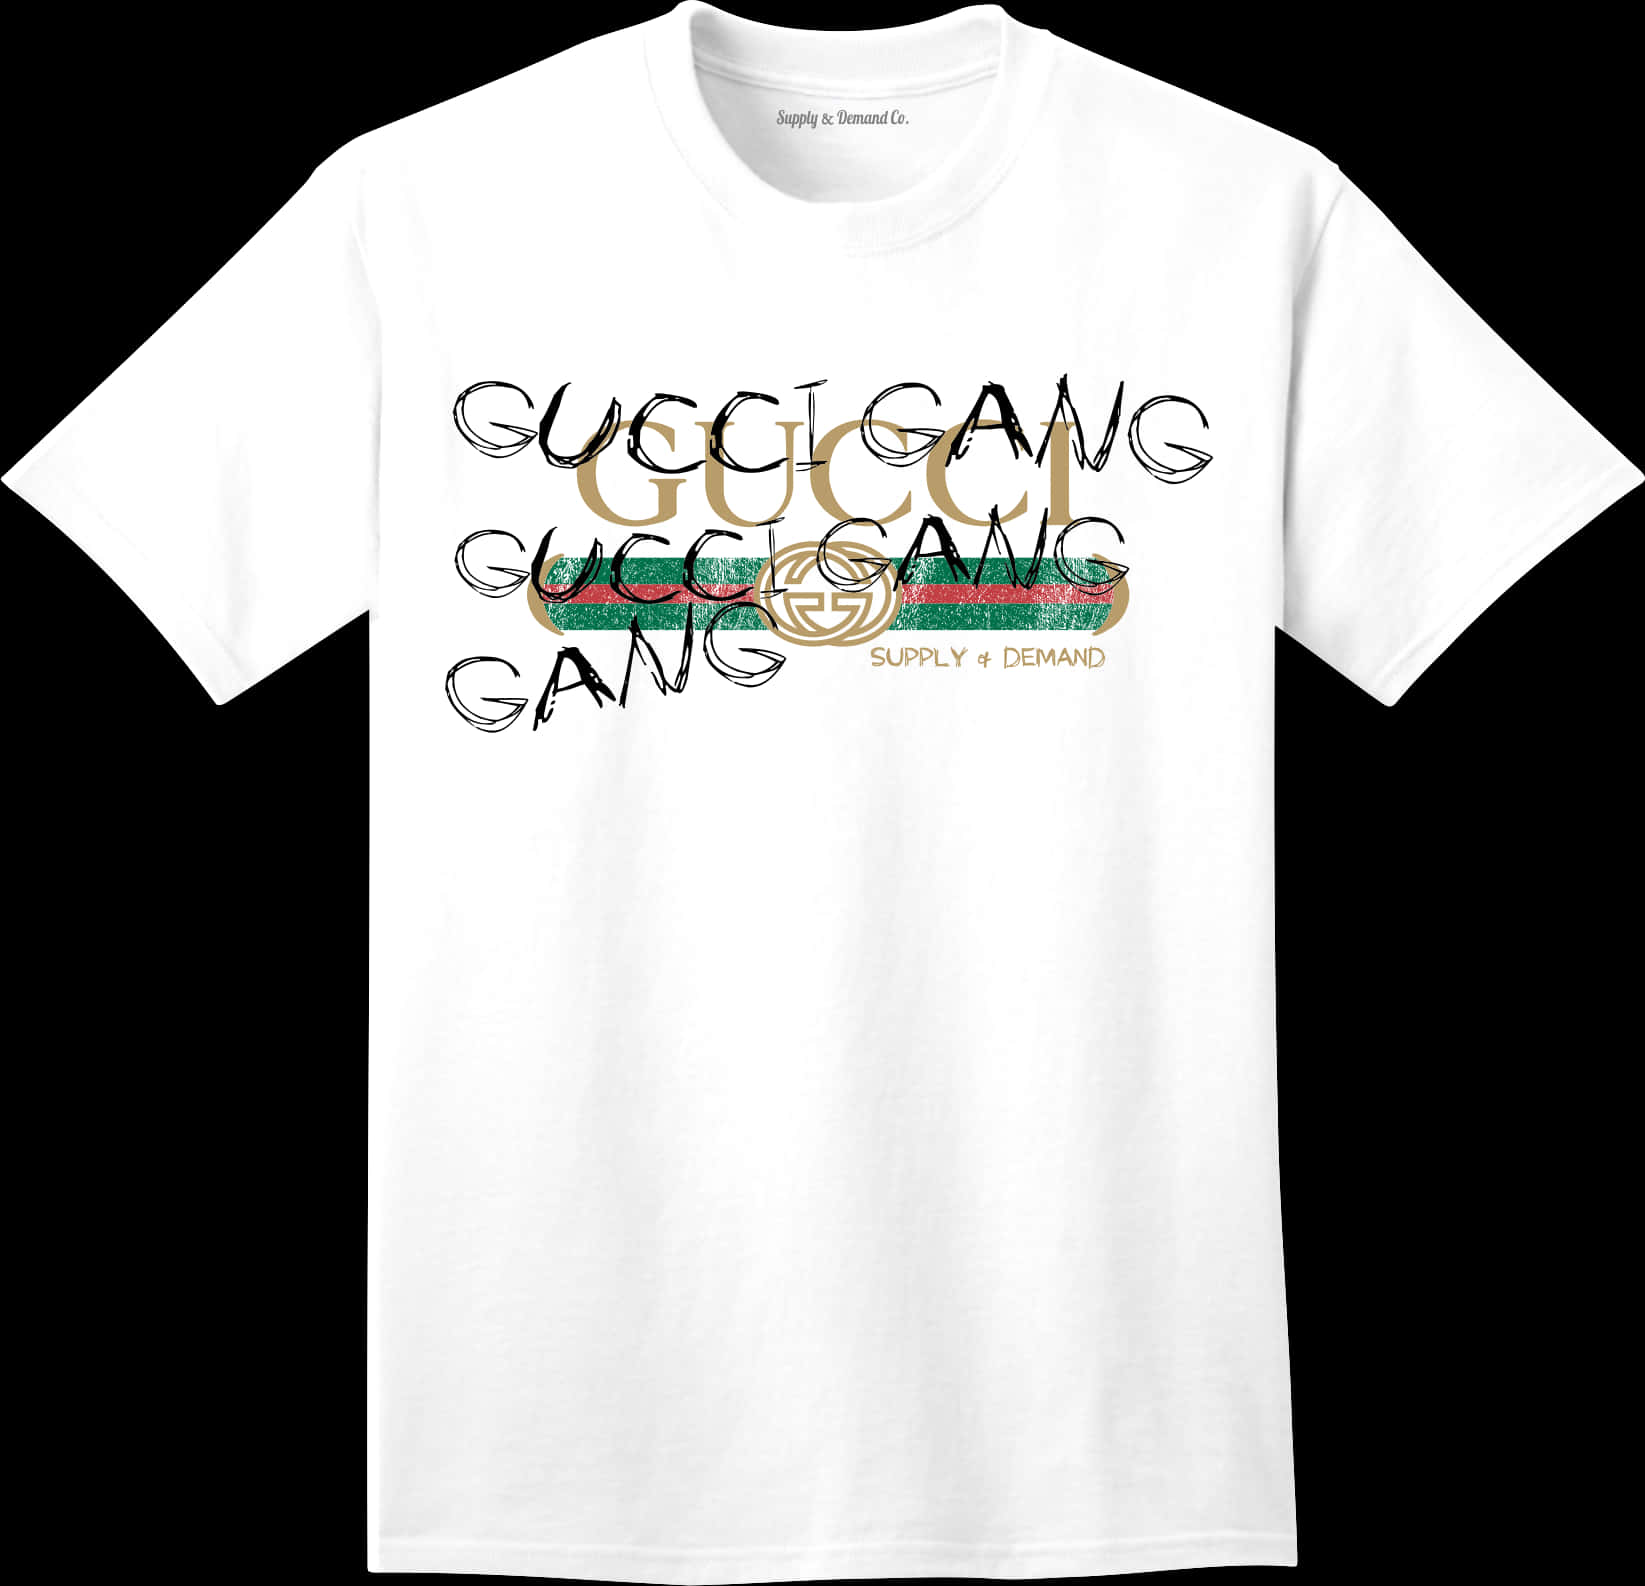 Gucci Gang Graphic Tee PNG image